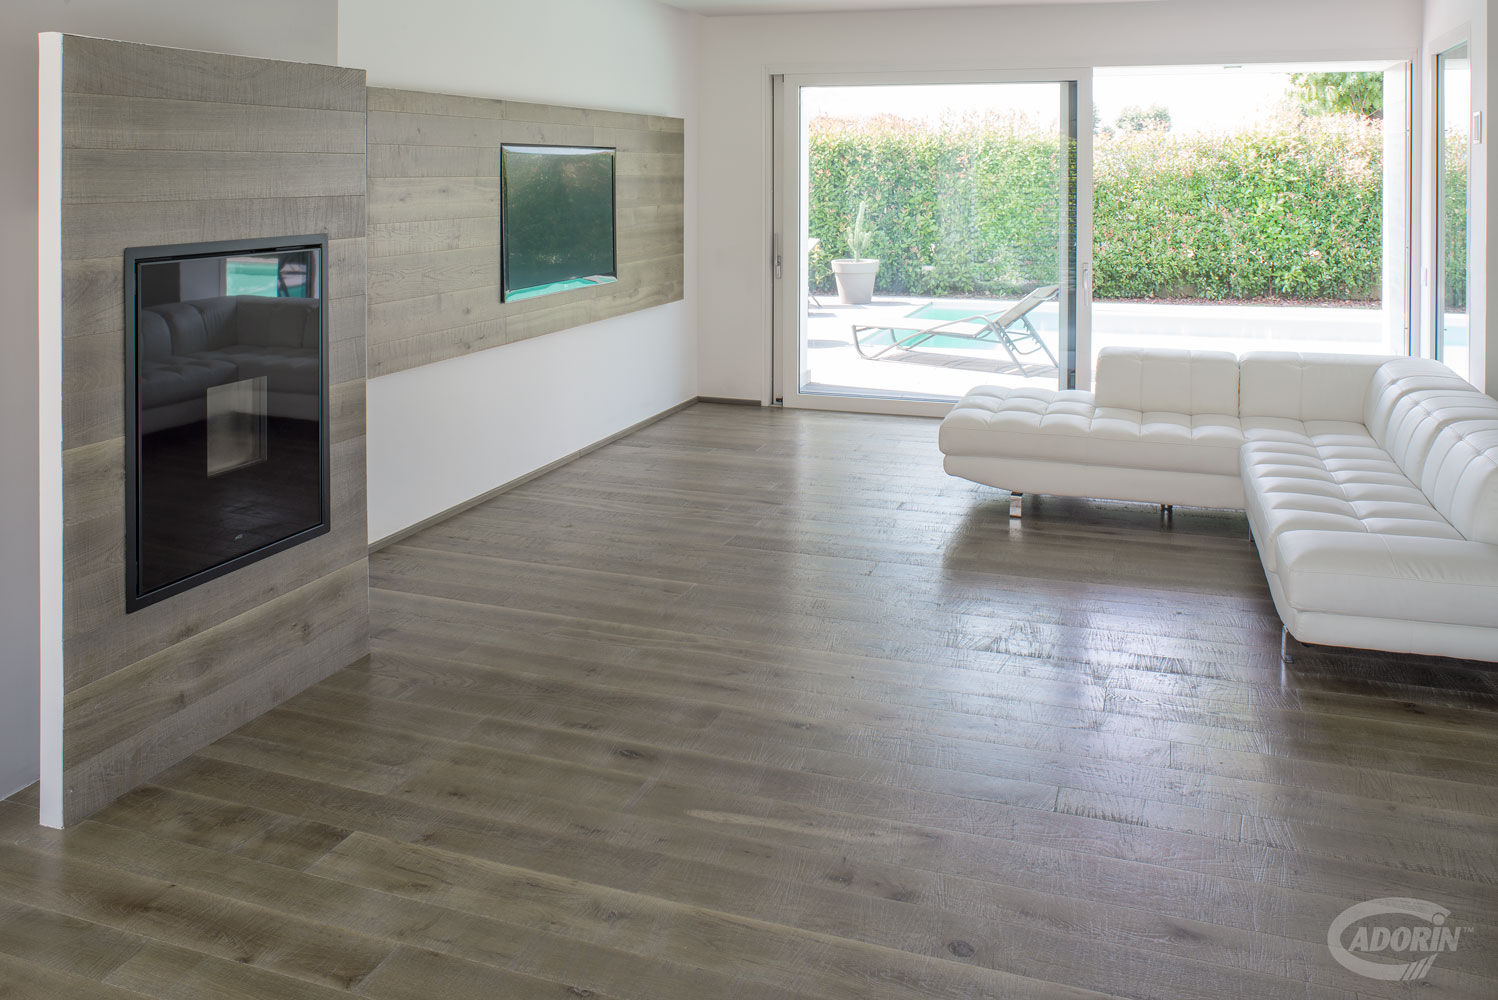 Cladding Quercus Cadorin Group Srl - Italian craftsmanship production Wood flooring and Coverings Planchers